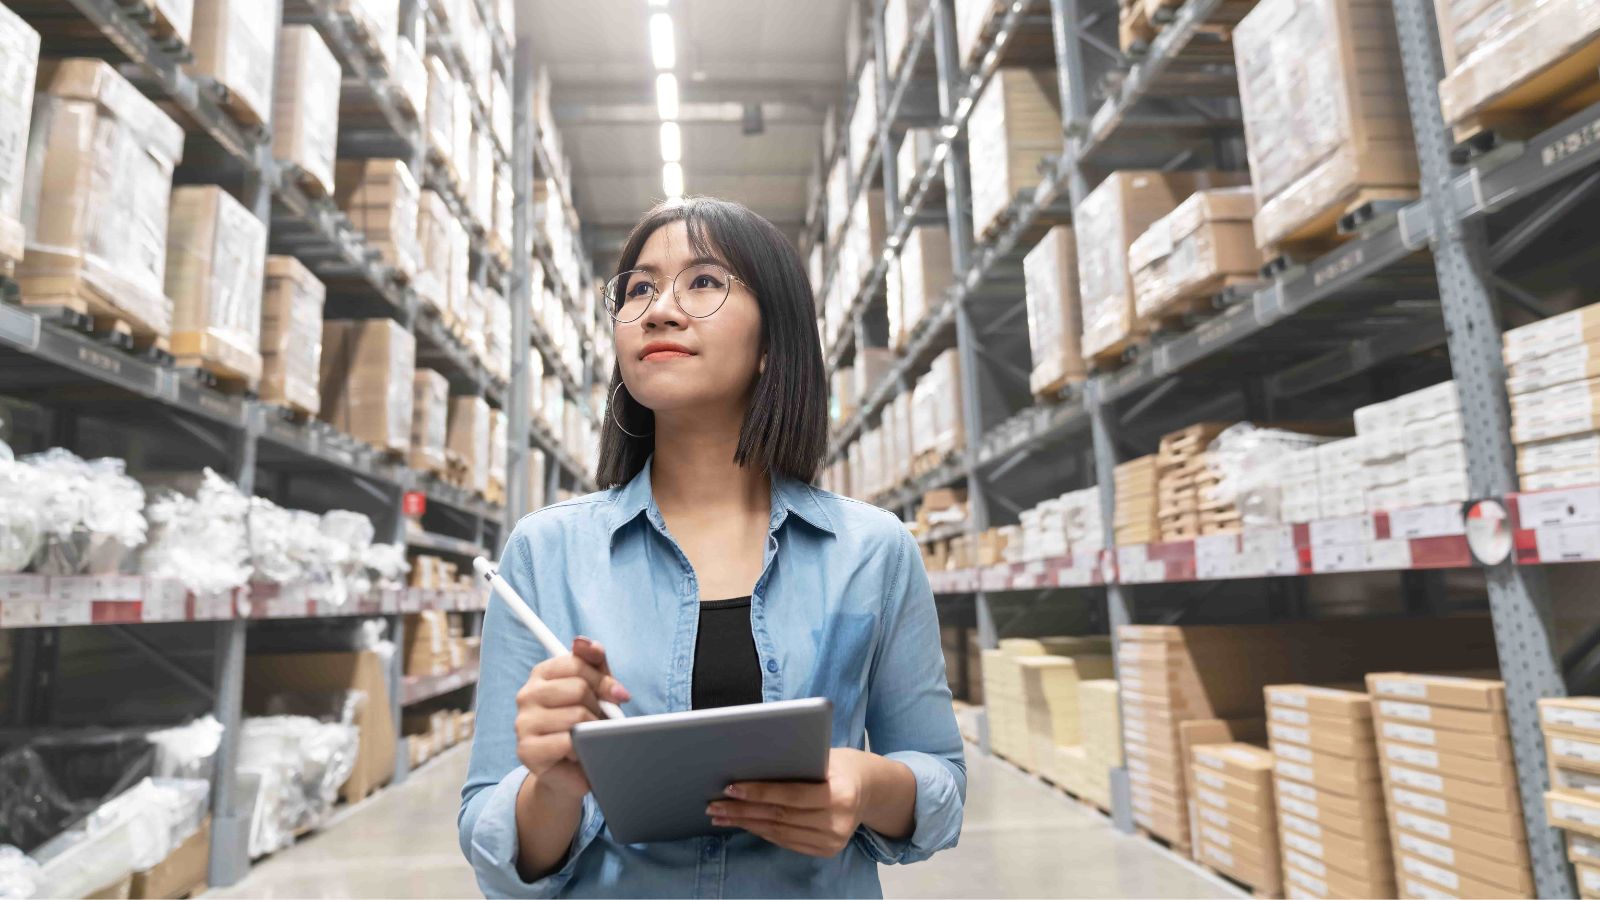 Woman with glasses in a warehouse holding a tablet